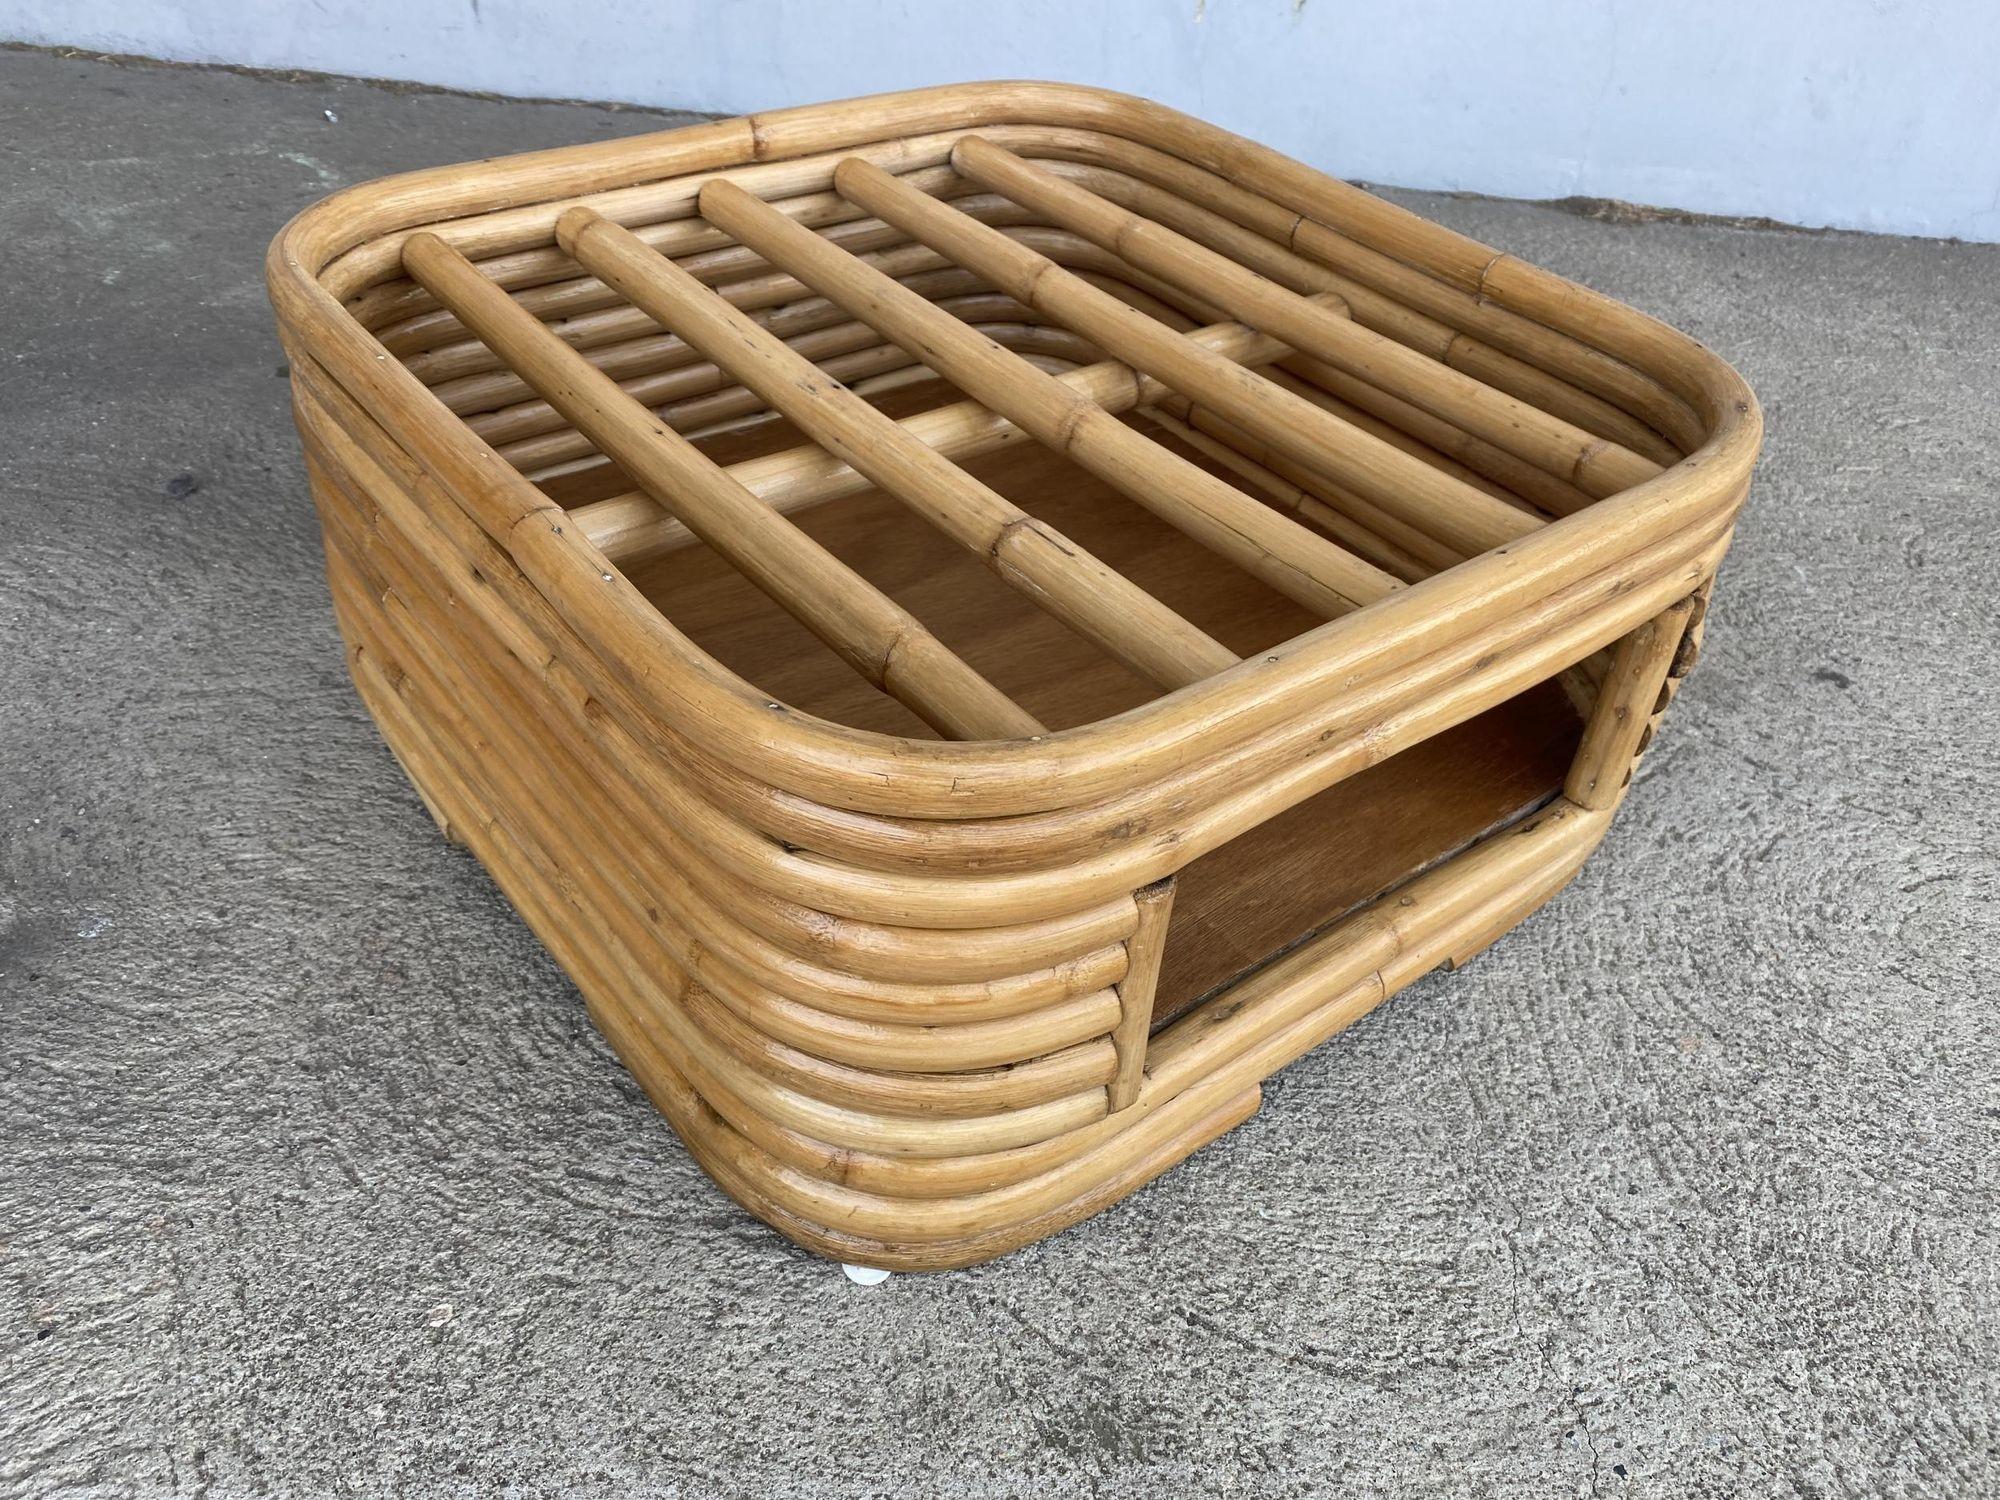 Fully restored stacked rattan ottoman footrest with underneath cubby space for magazines and other living room items. The ottoman features a cross bar top and a mahogany floor in the cubby space.
1950, USA

Included in the price is a custom choice